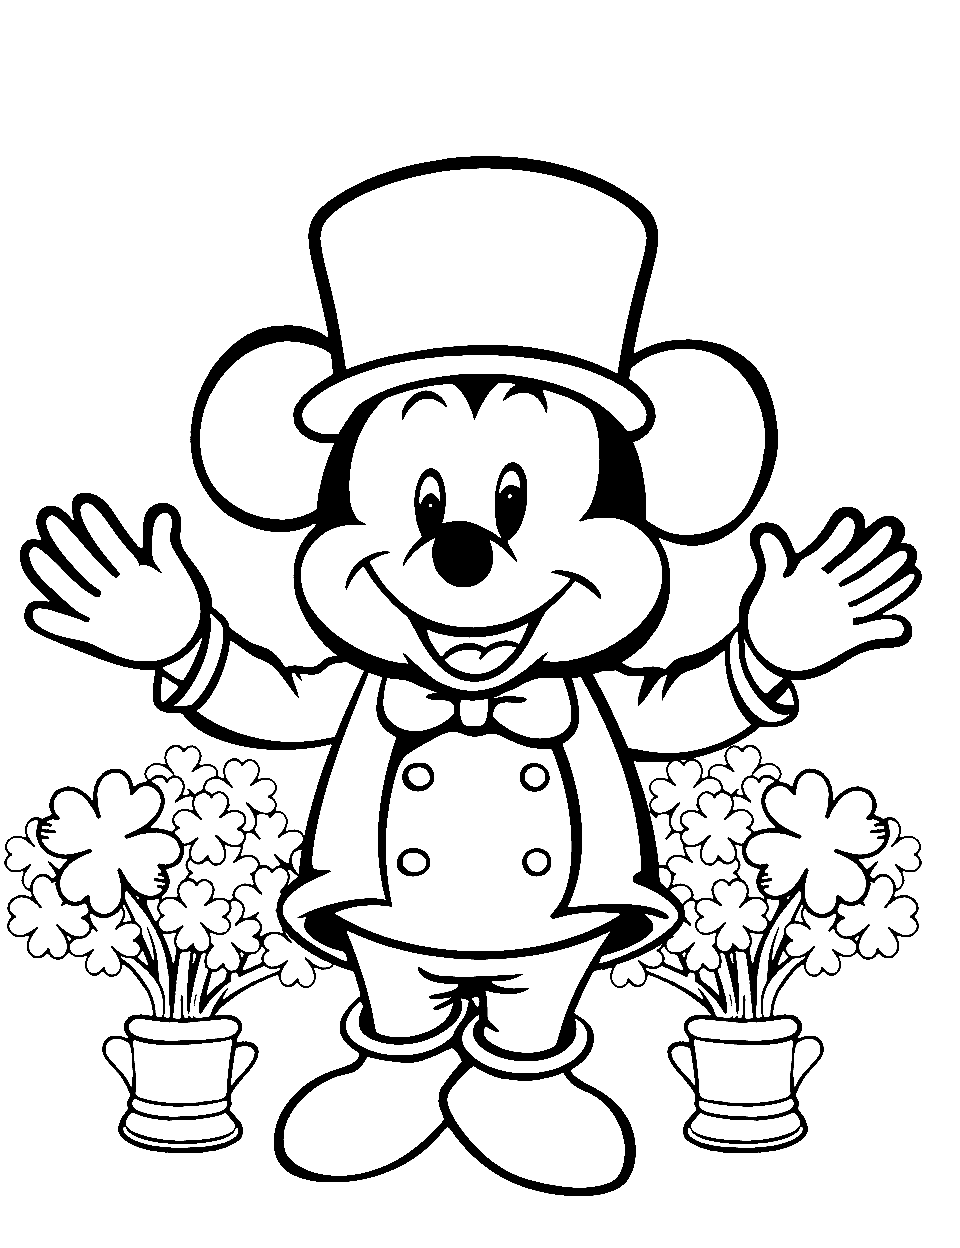 Mickey Mouse Wearing Green Coloring Page - Mickey Mouse dressed in a St. Patrick’s Day outfit with shamrocks around.